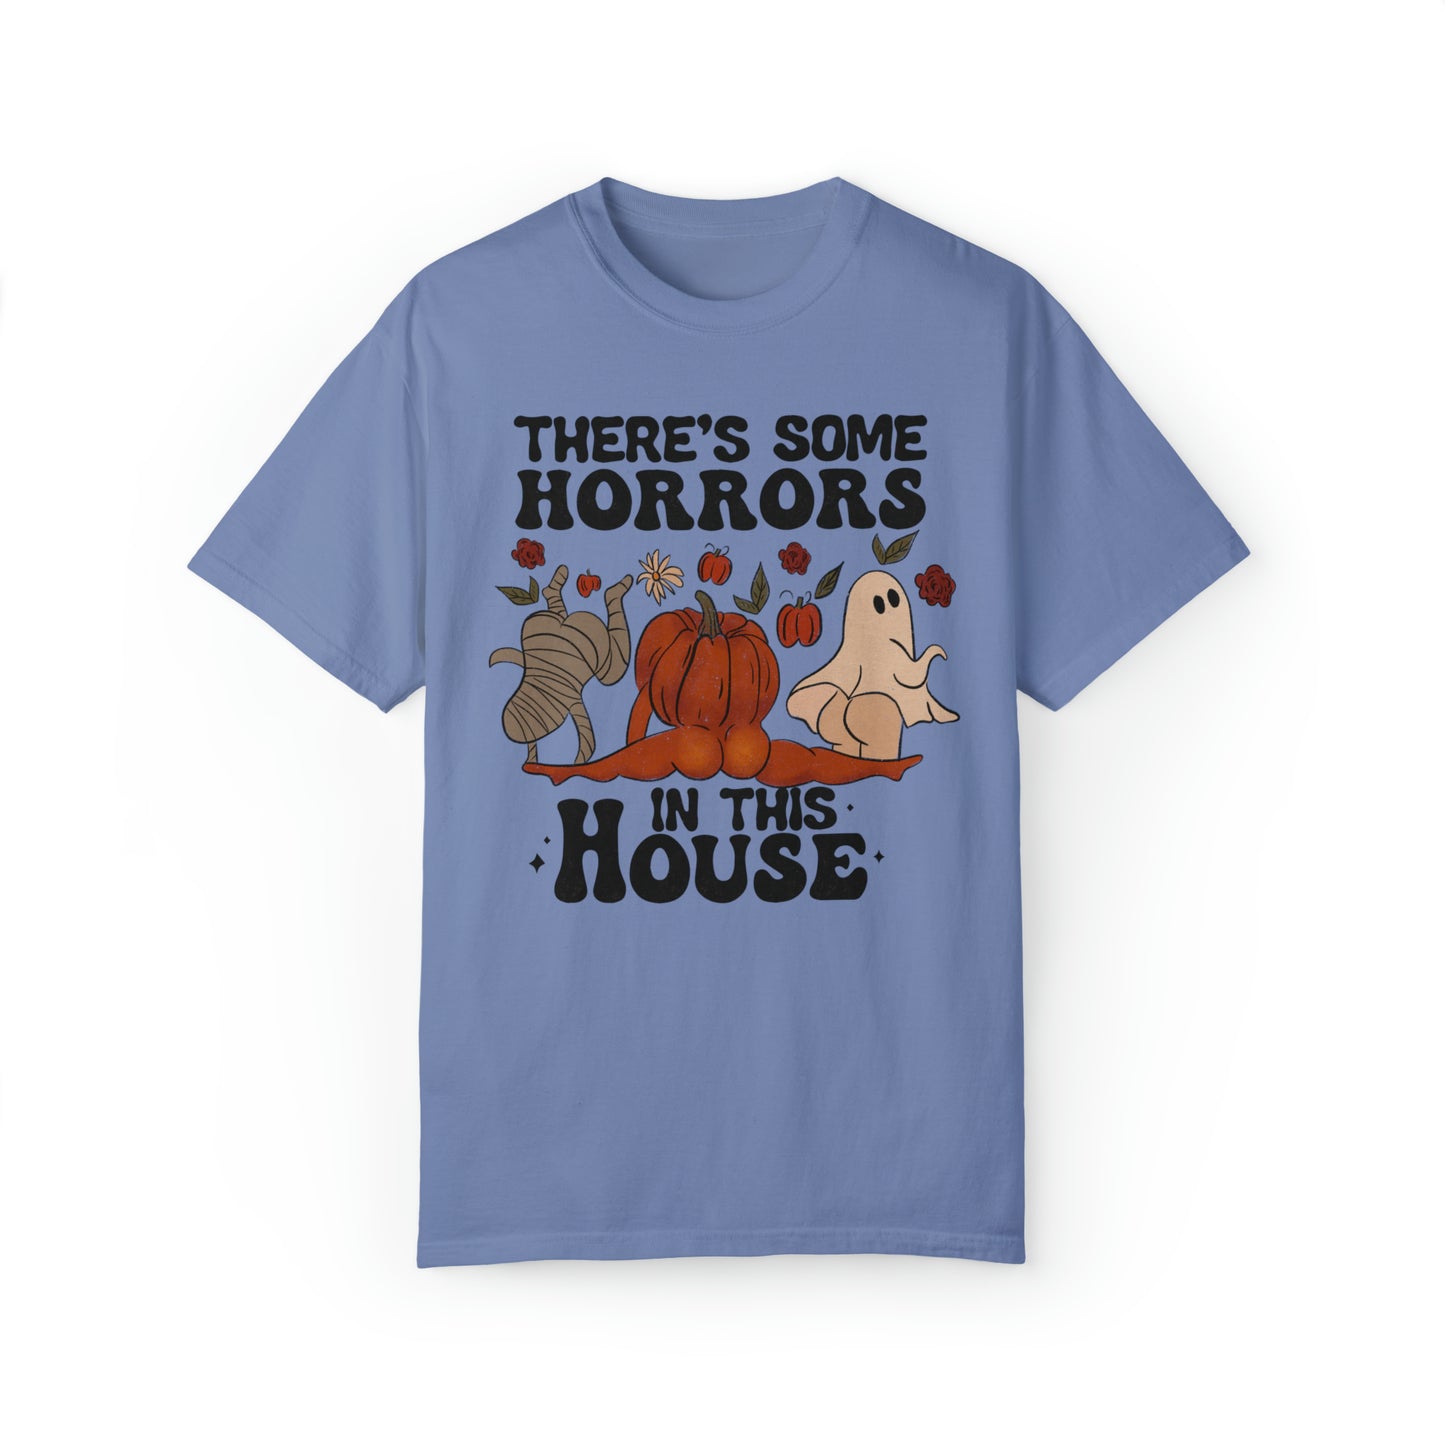 There's Some Horrors in this House, Comfort Colors Funny Halloween Ghost Shirt